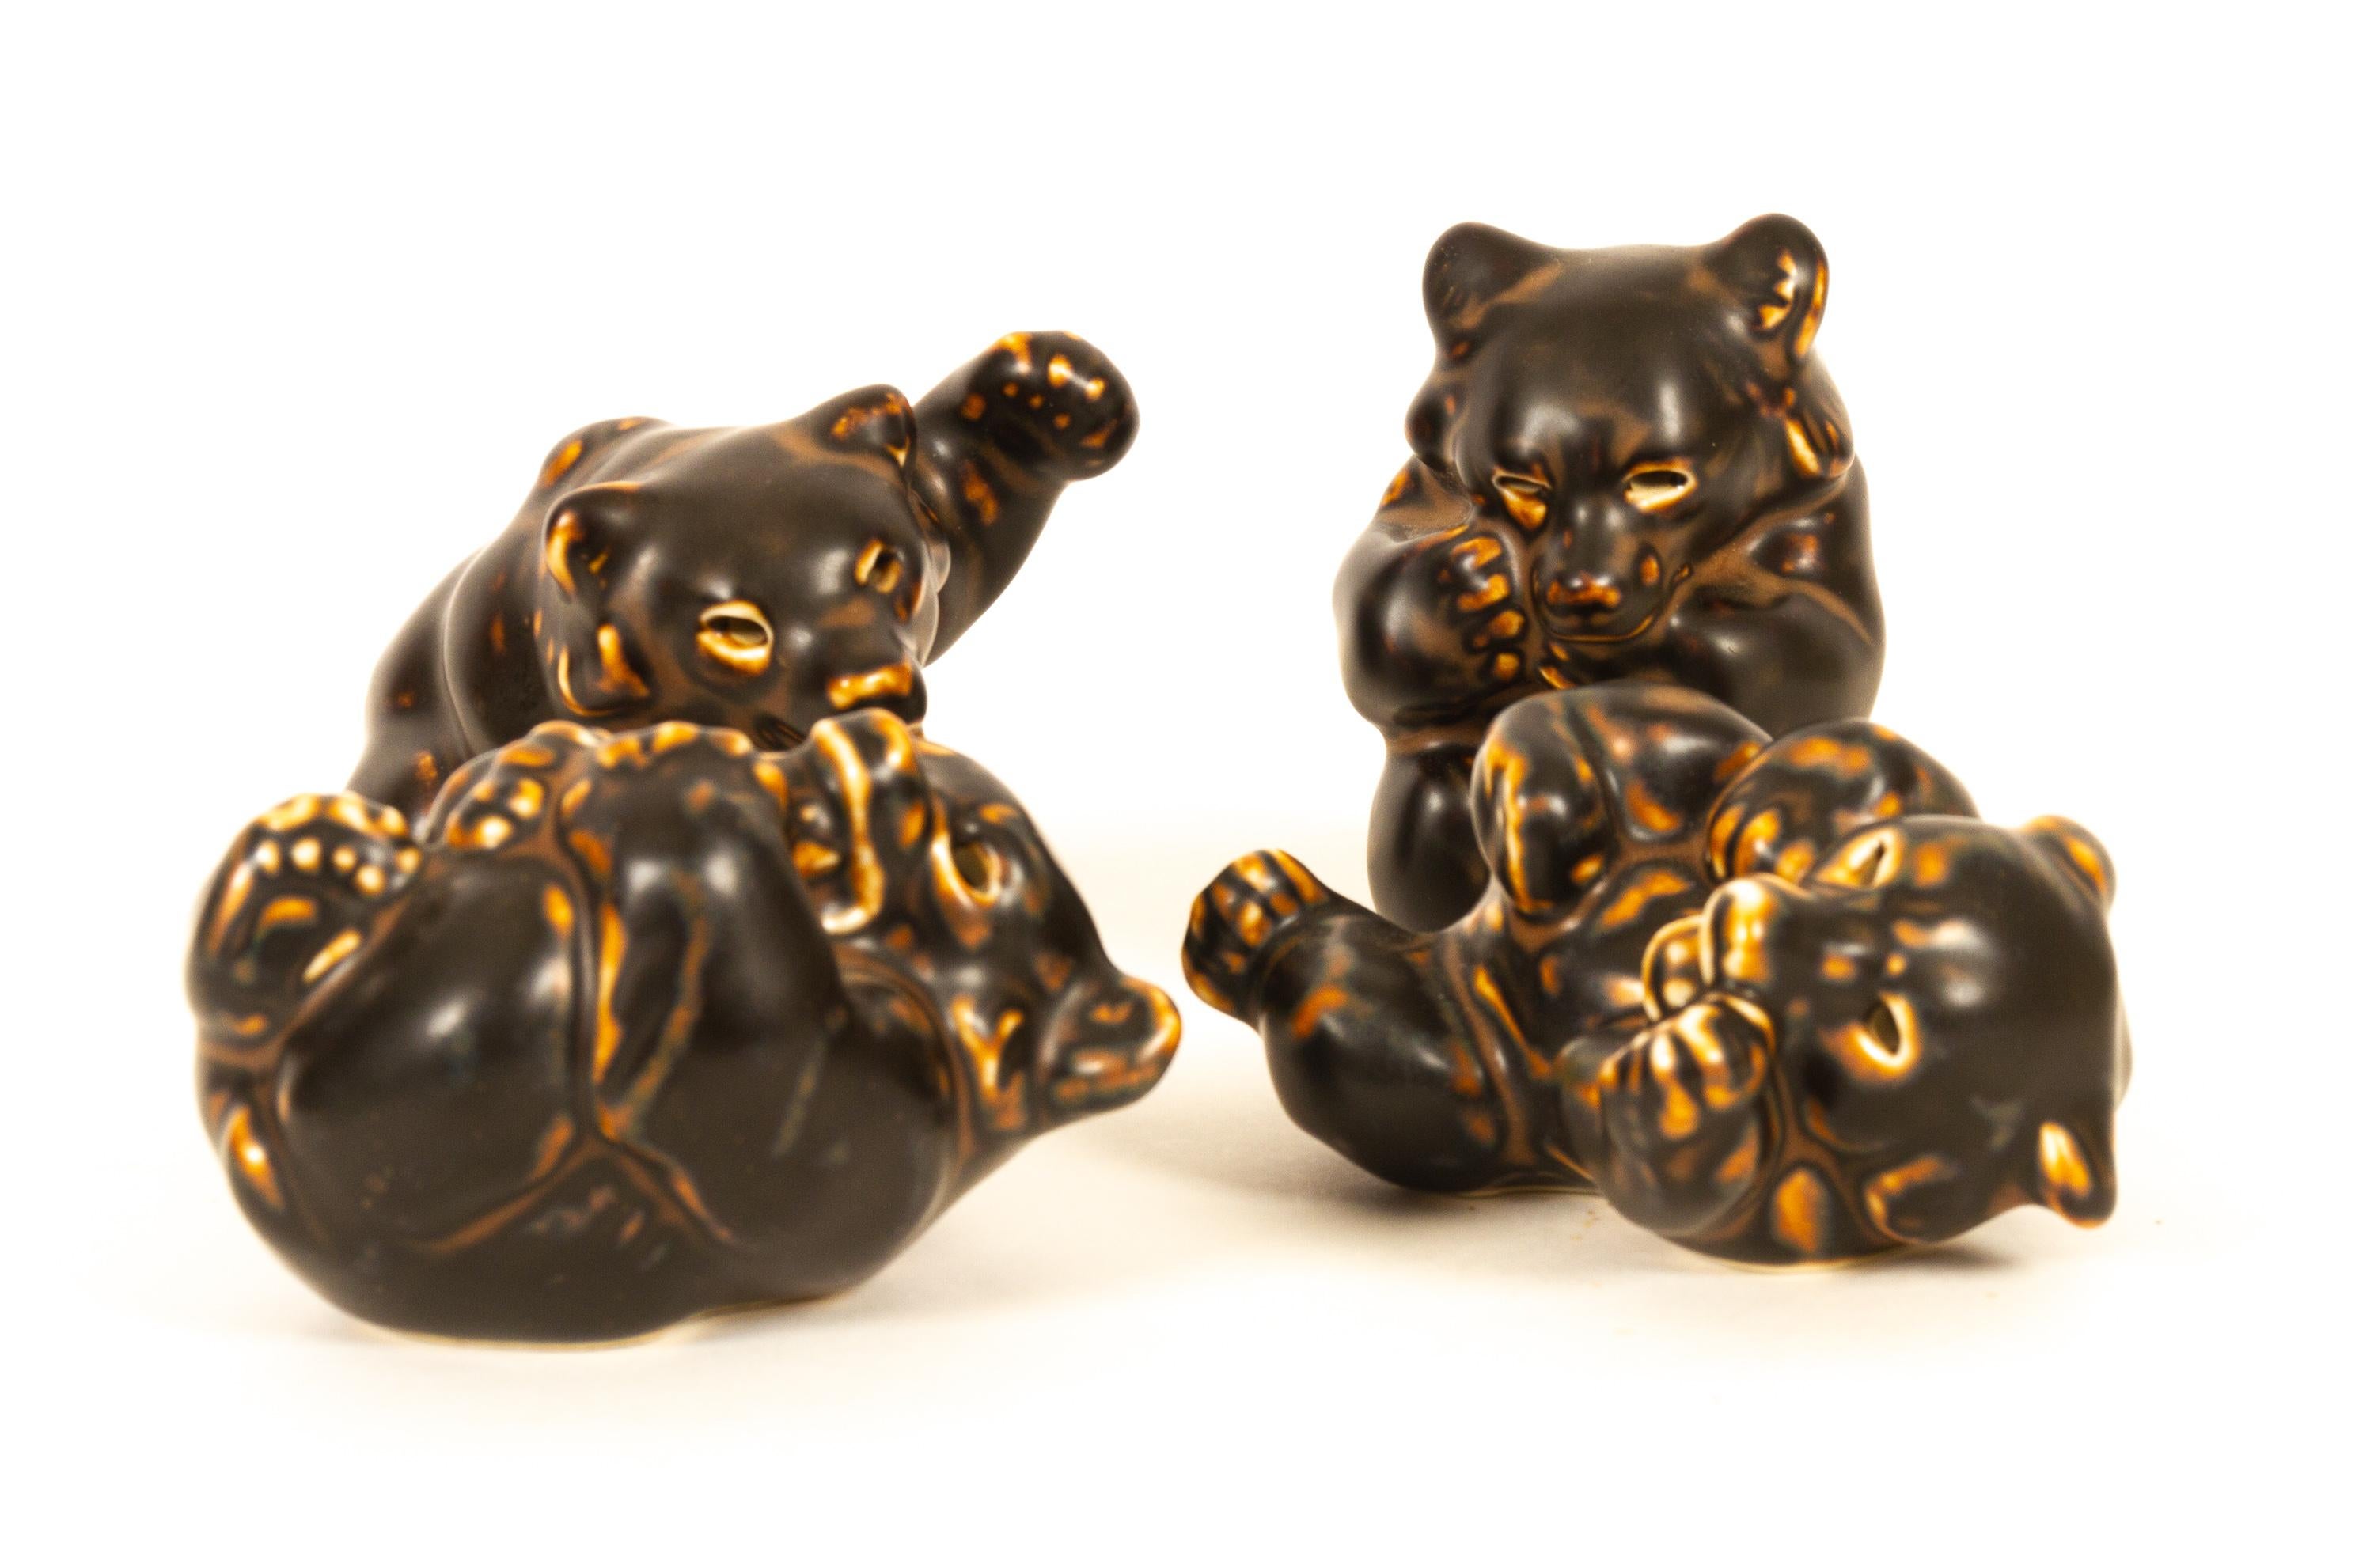 Danish bear cubs figurines by Knud Kyhn for Royal Copenhagen 1950s Set of 4.

Ceramic figurines designed by Danish ceramist Knud Kyhn, Models no: 21432, 21433, 21434 and 21435.

Perfect condition, 1. factory quality. No chips or cracks.